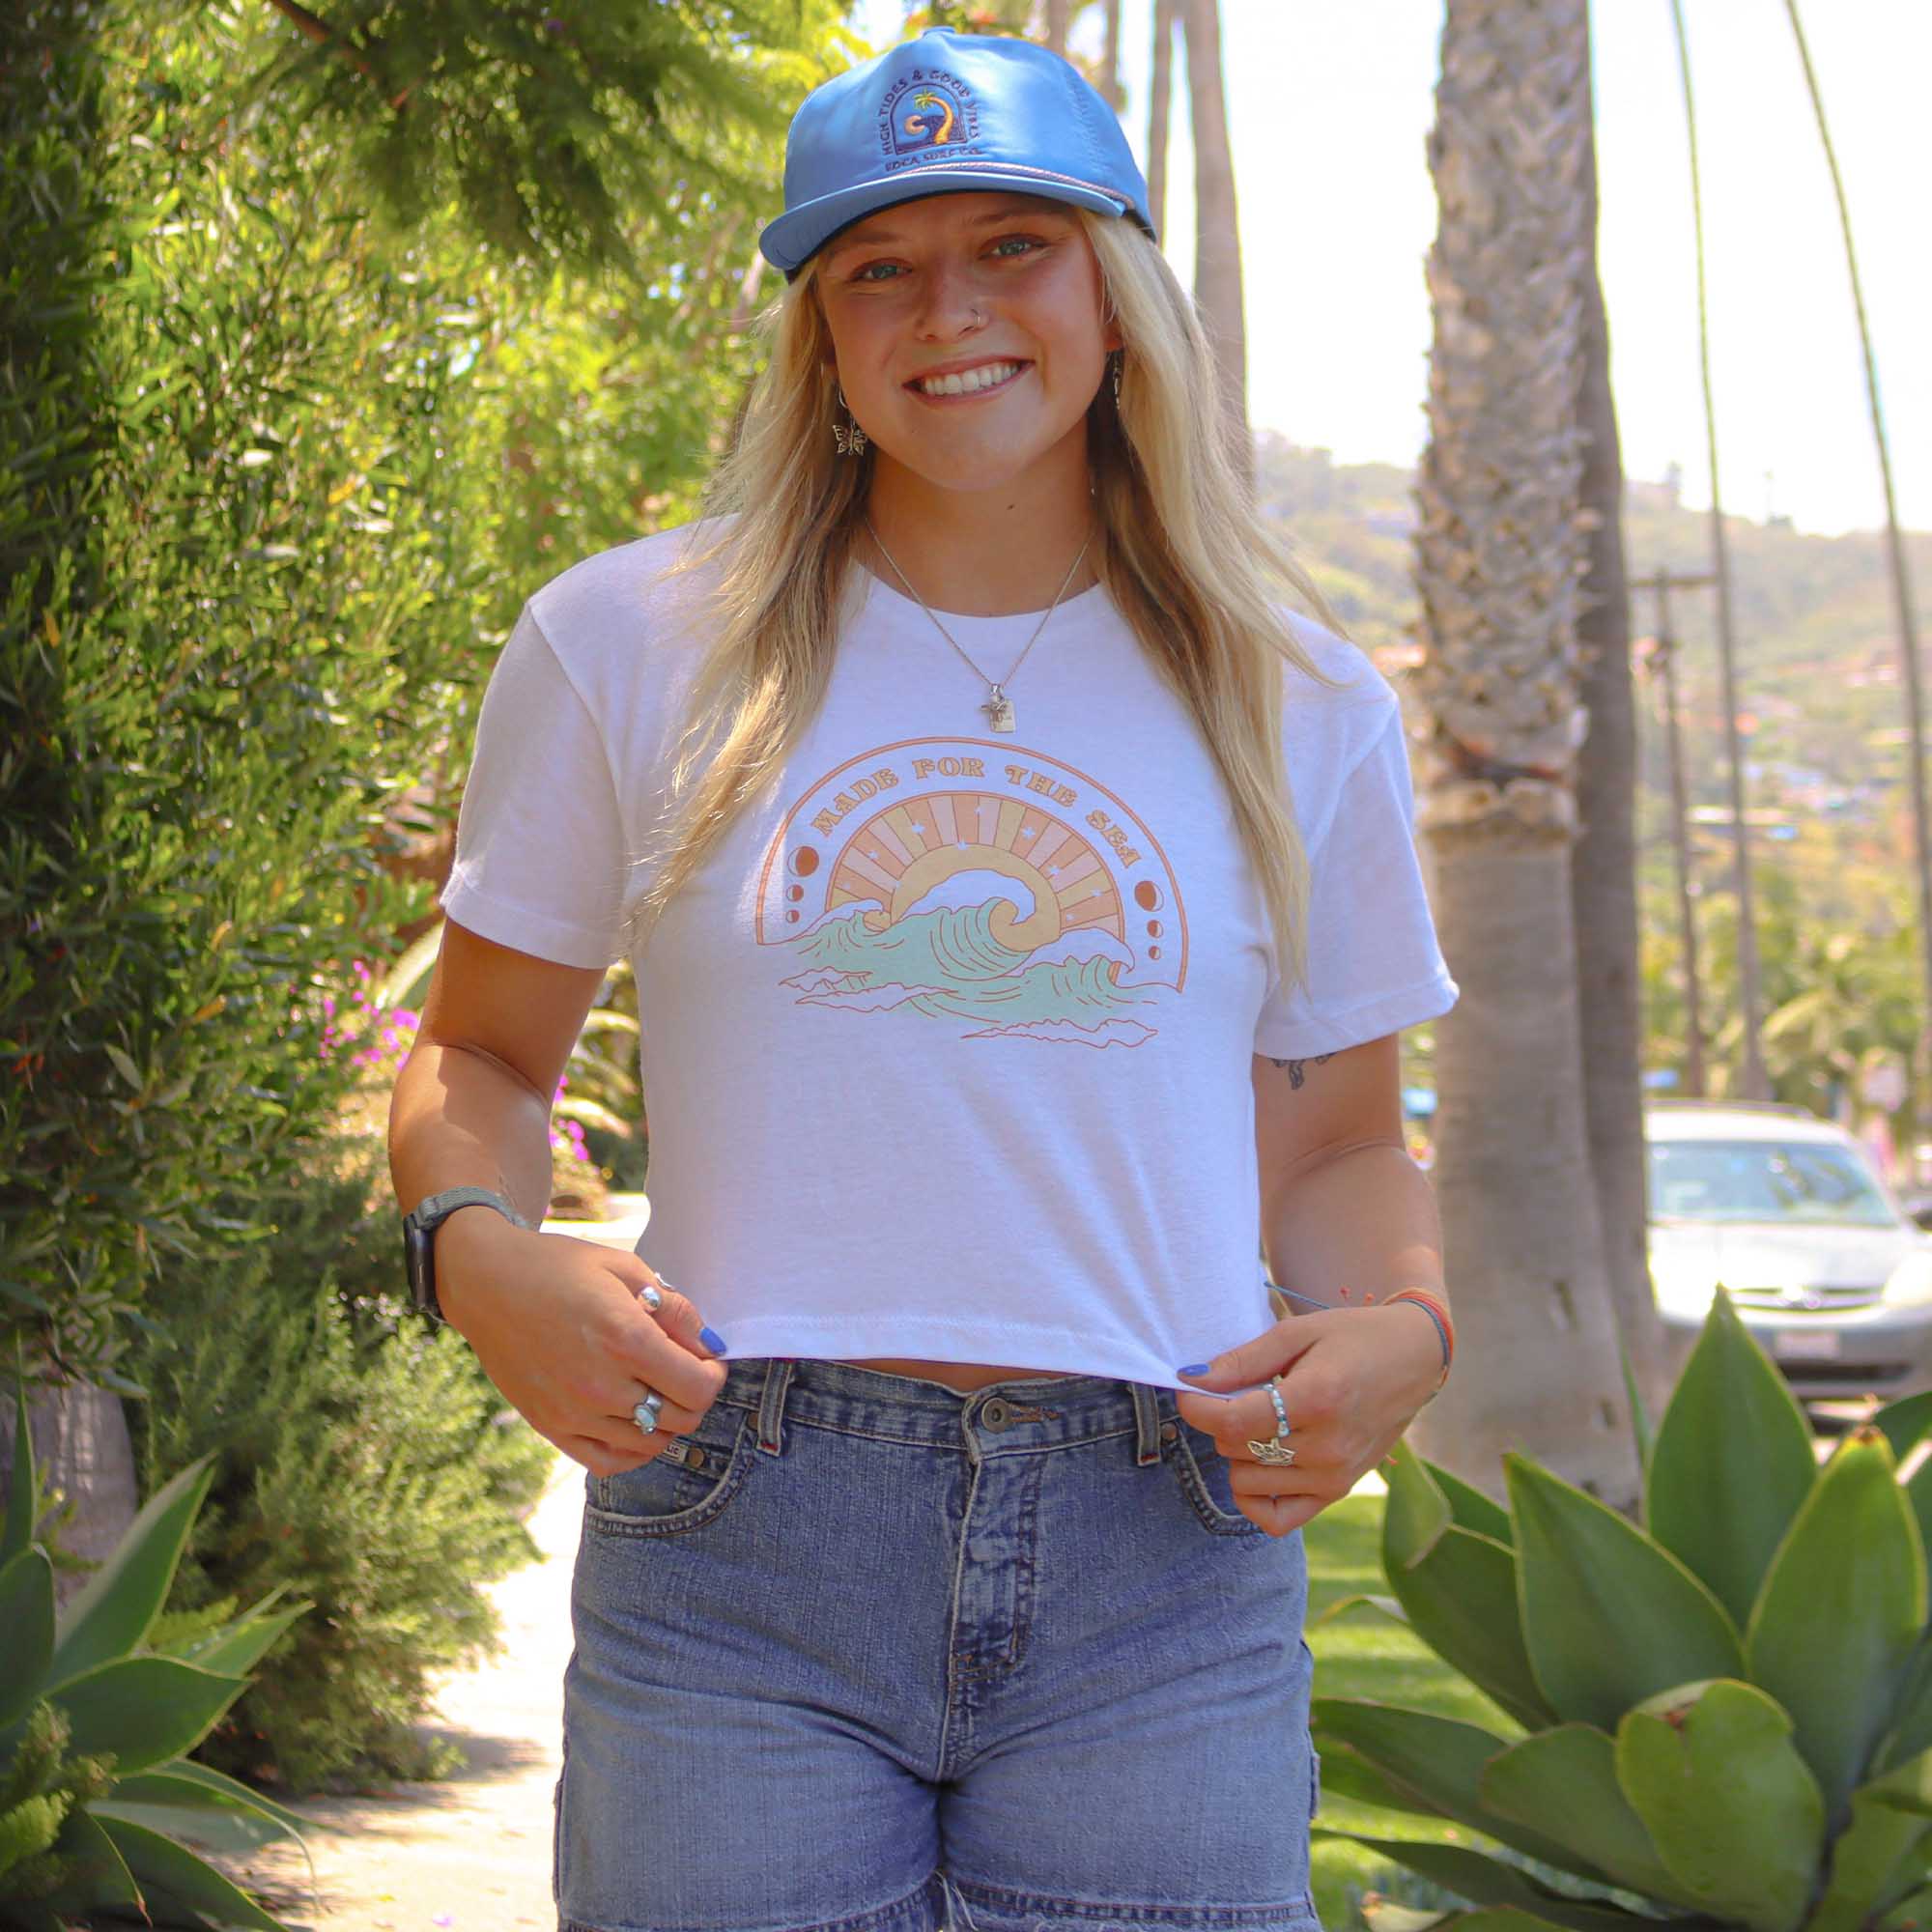 A model showcasing the Women's Tourmaline Crop Tee with "Made for the Sea" printed on the front above a design of a wave and sun